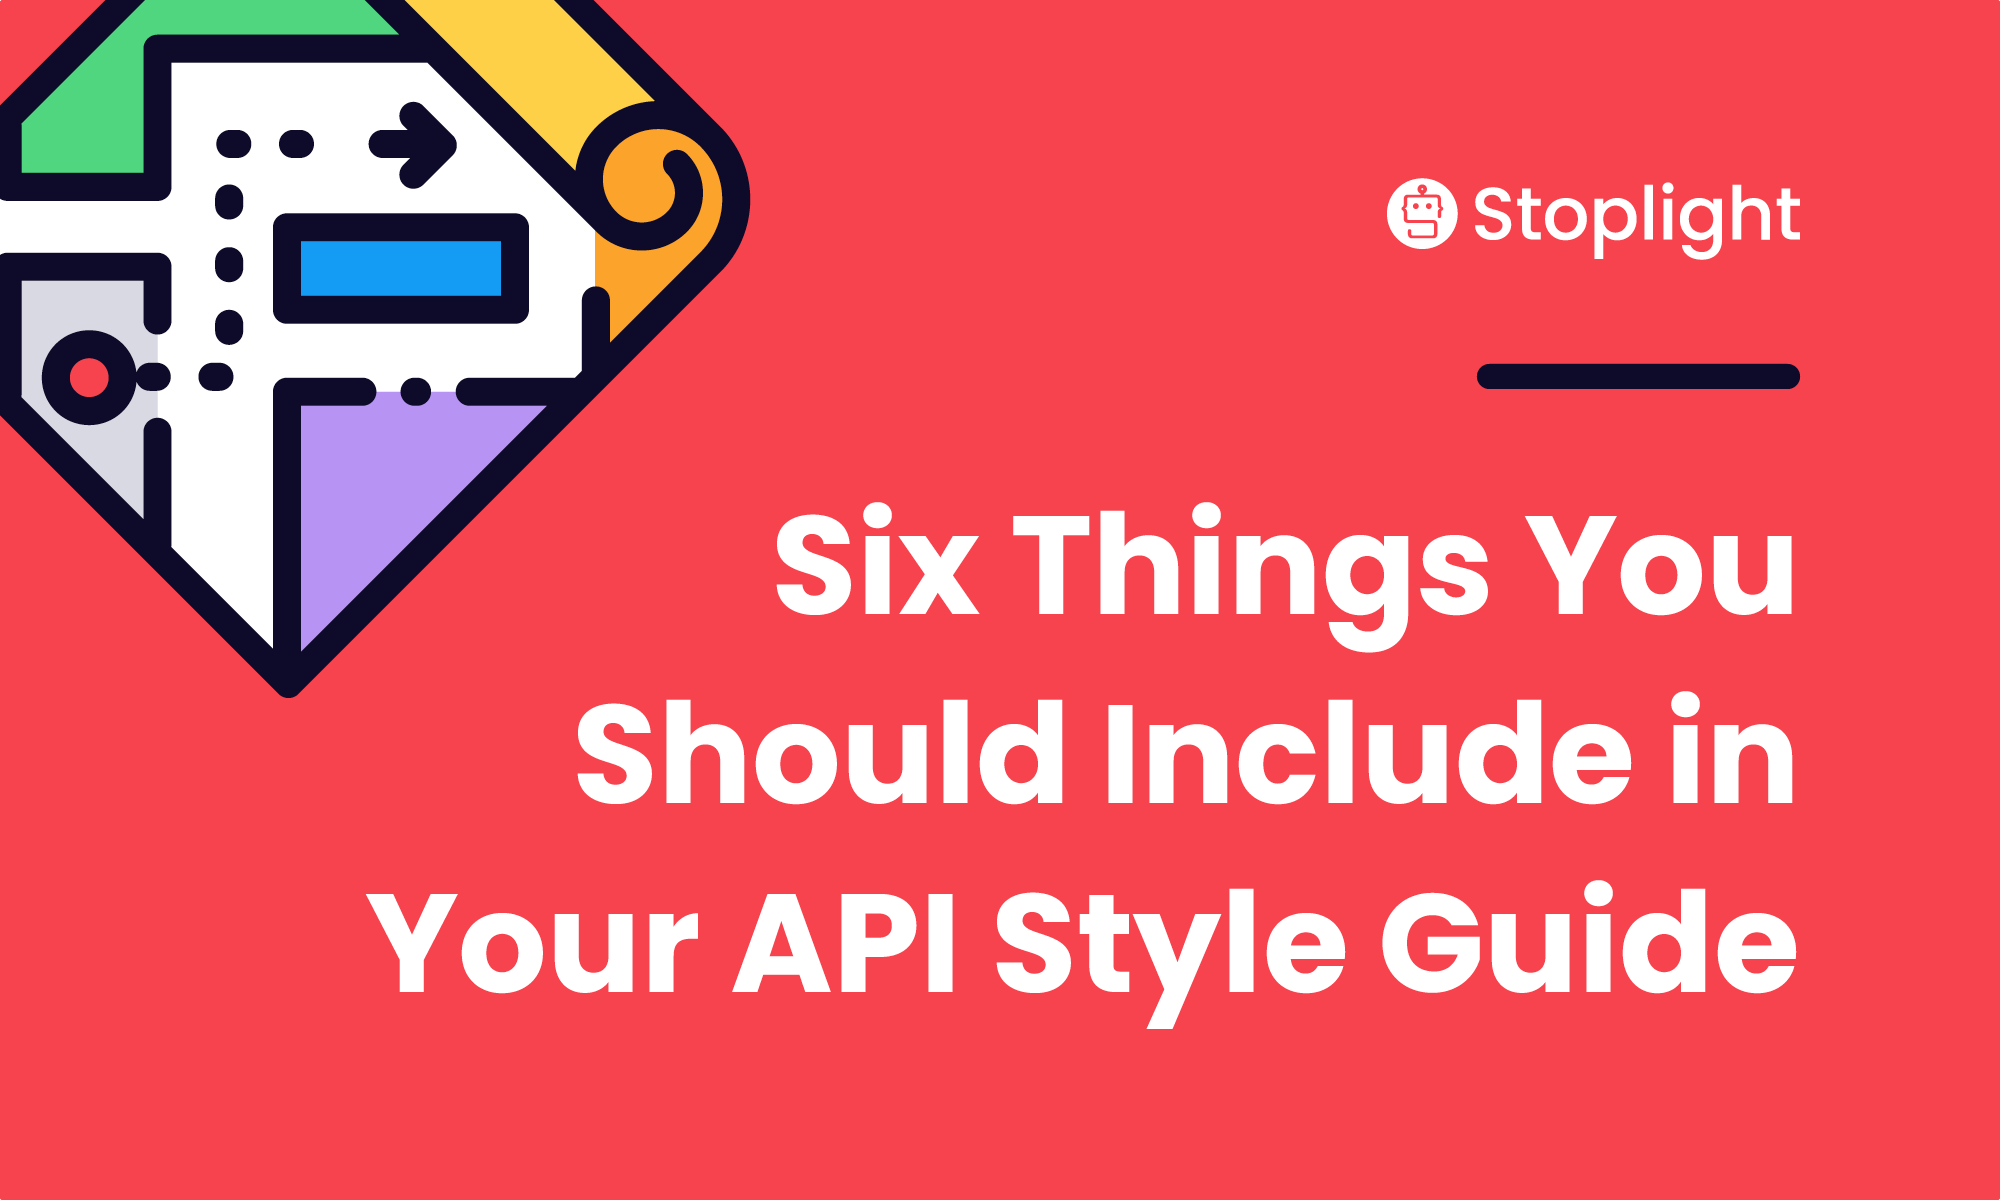 Six Things You Should Include in Your API Style Guide